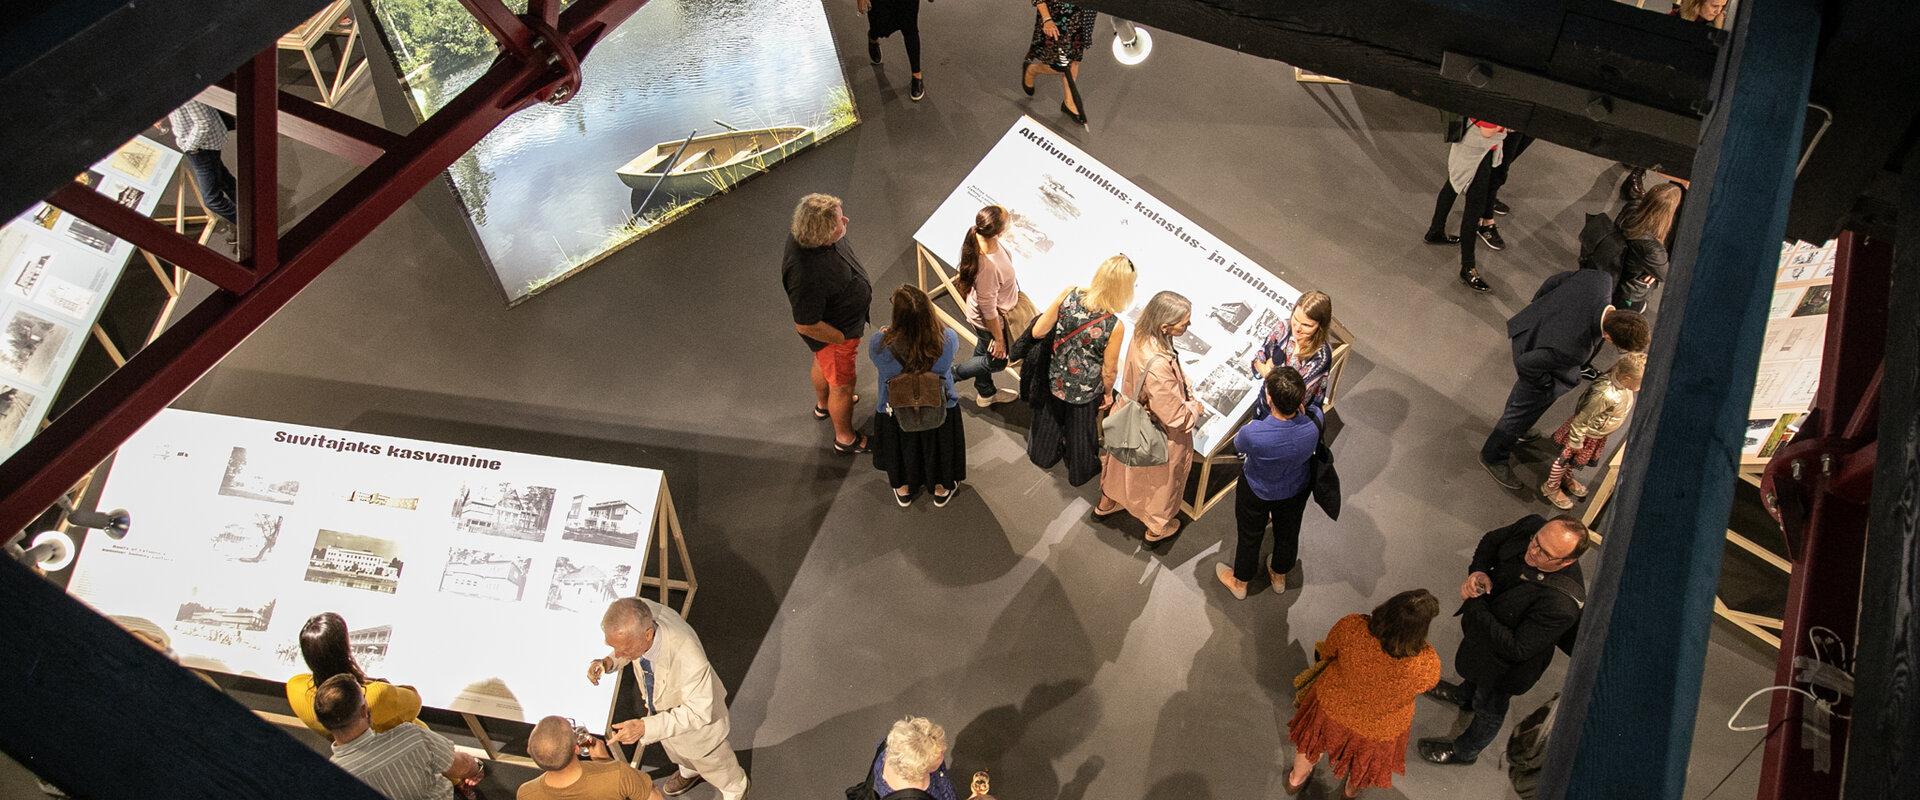 Exhibition tours of the Museum of Estonian Architecture